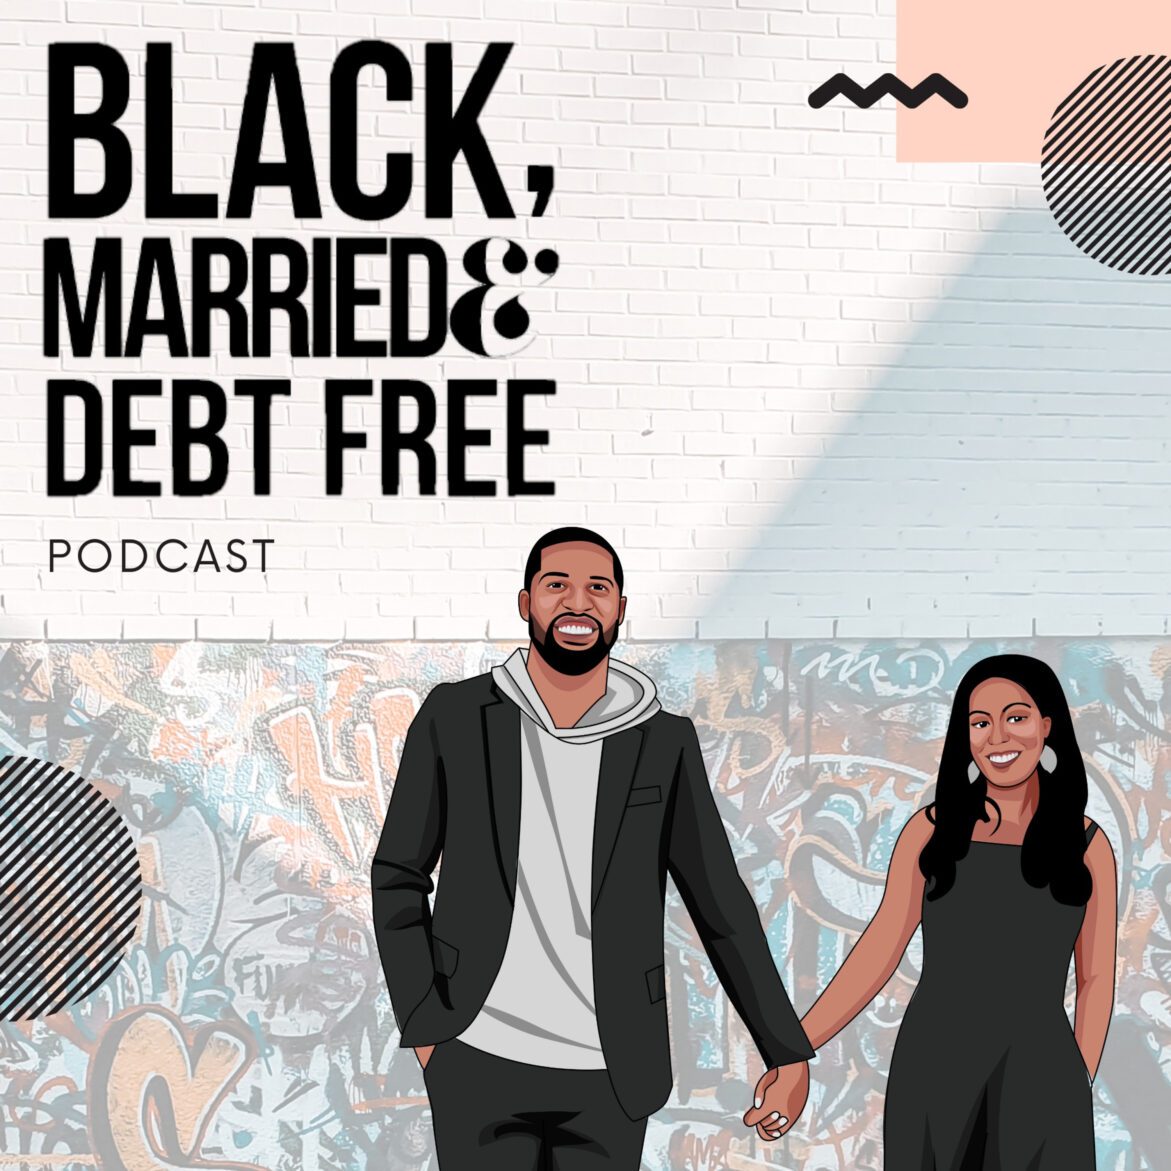 Black Podcasting - (EP - 235 NO MUSIC) YOUR FAVORITE FINANCIAL YOUTUBERS ARE BEING SUED IN FTX SCANDAL